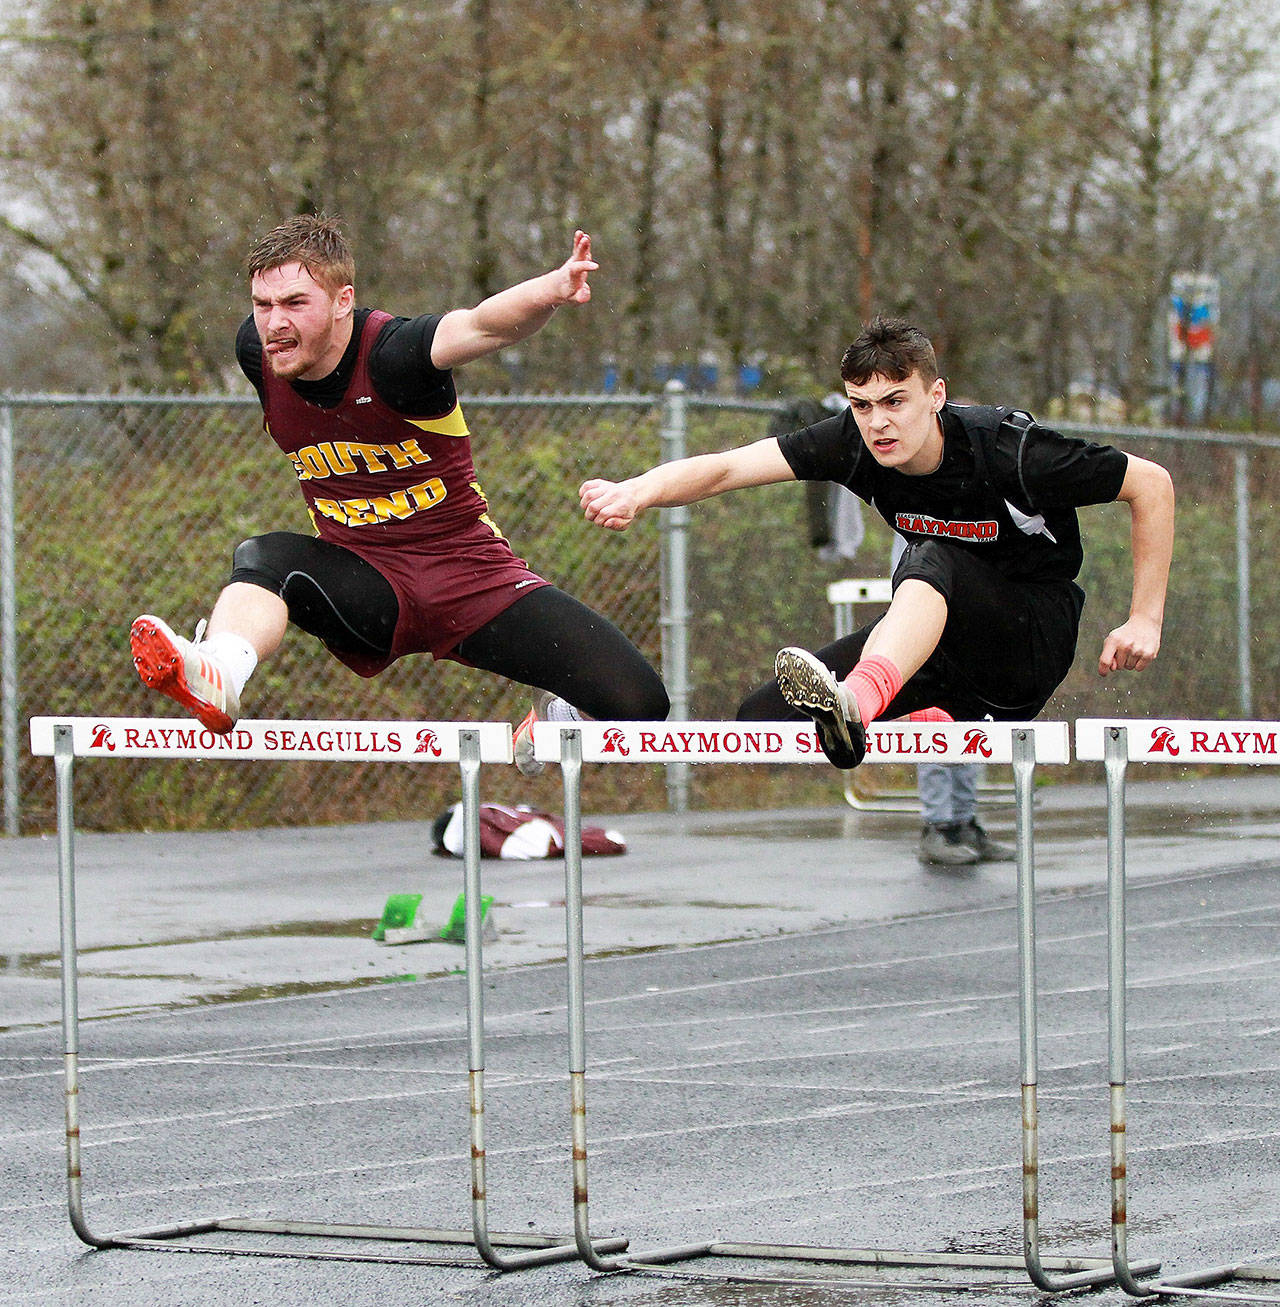 South Bend’s Ben Byington, left, and Raymond’s McCartney Maden battle over the hurdles Thursday during the Willapa Harbor tri-district meet. Maden won the race. (Photo by Larry Bale.)